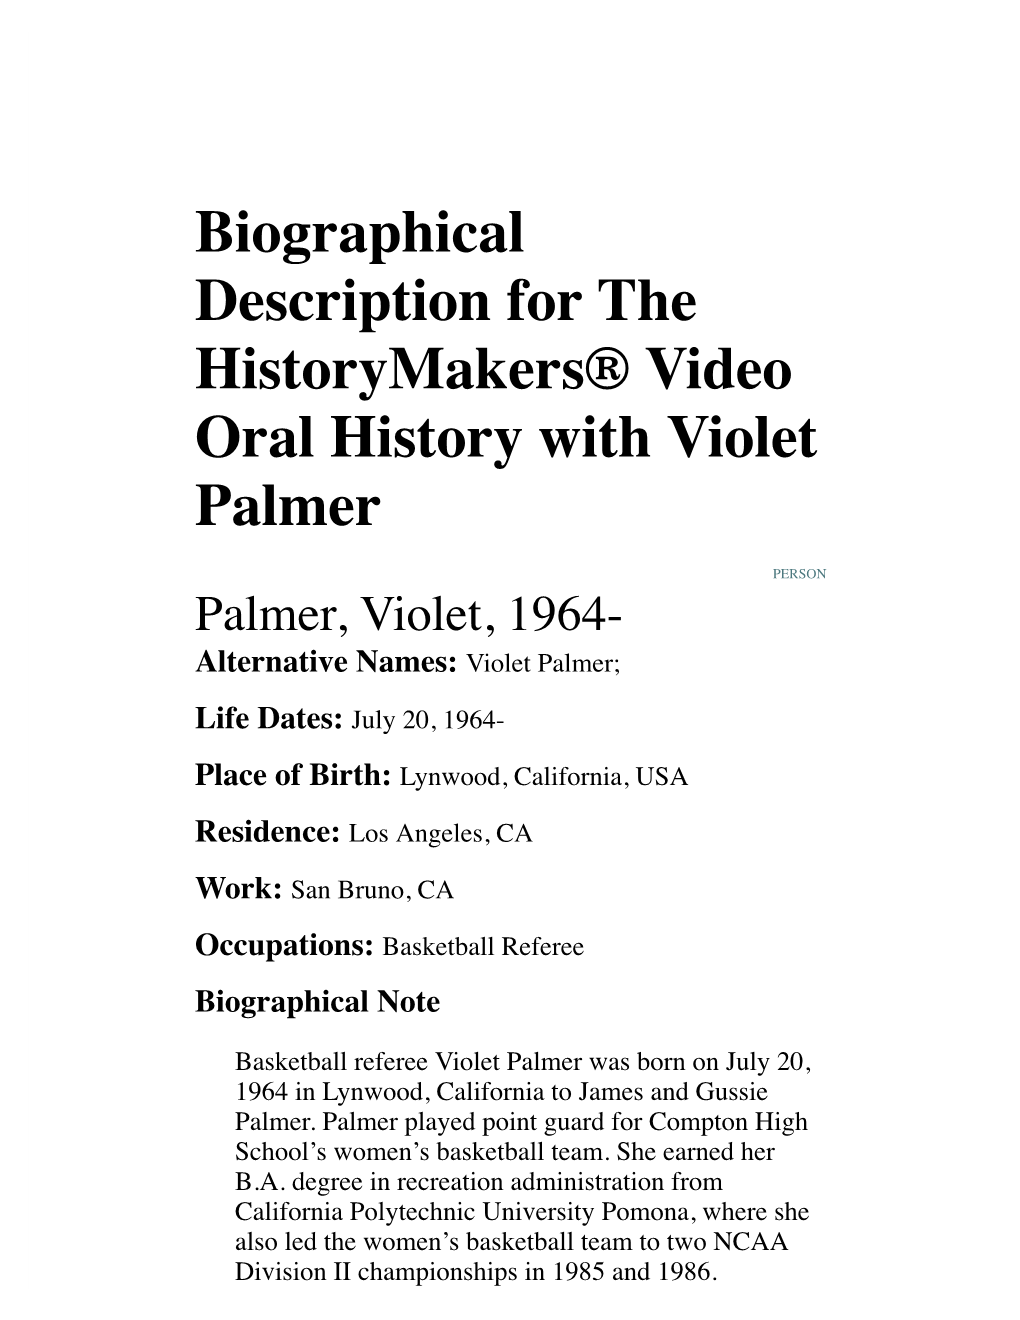 Biographical Description for the Historymakers® Video Oral History with Violet Palmer